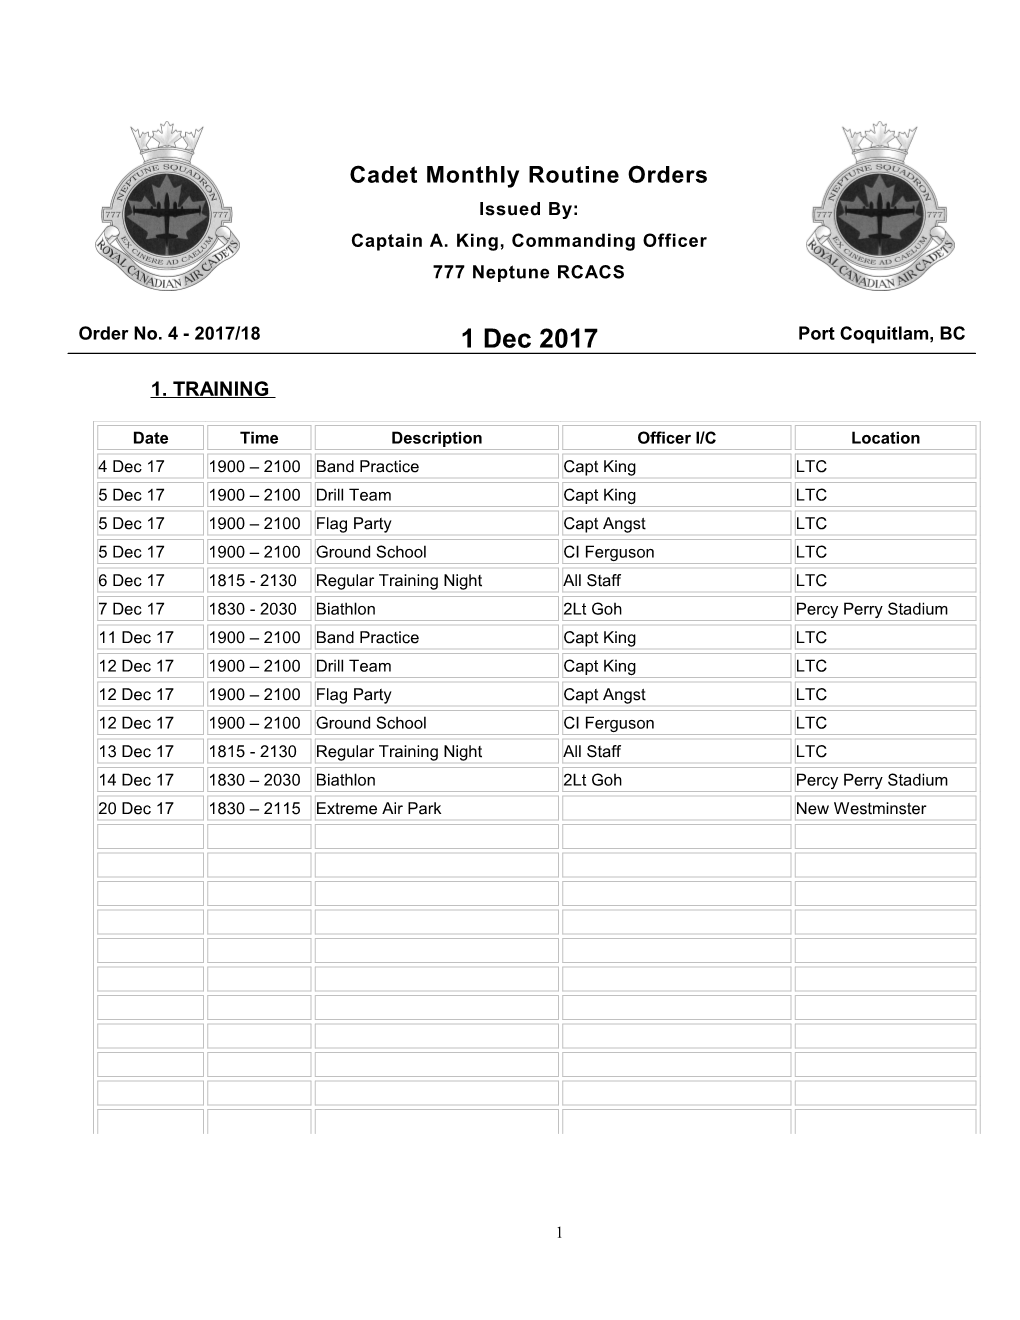 Cadet Monthly Routine Ordersissued By:Captain A. King, Commanding Officer777 Neptune RCACS s1